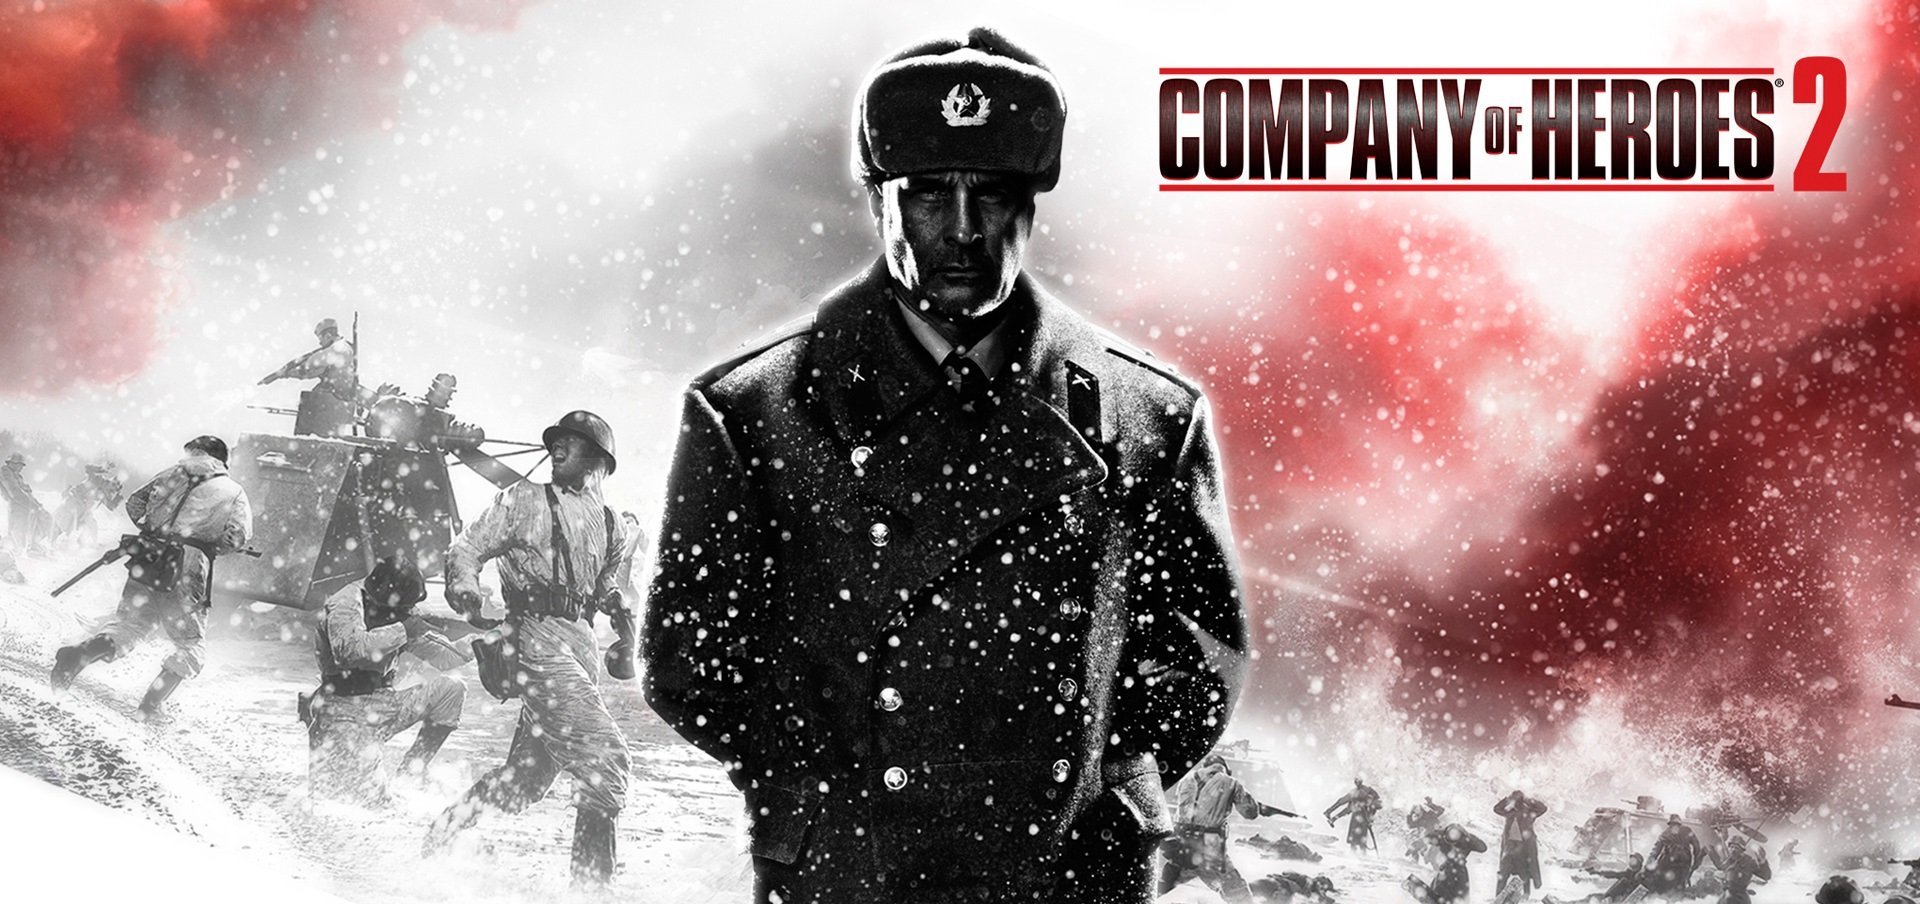 company of heroes 2 full game free